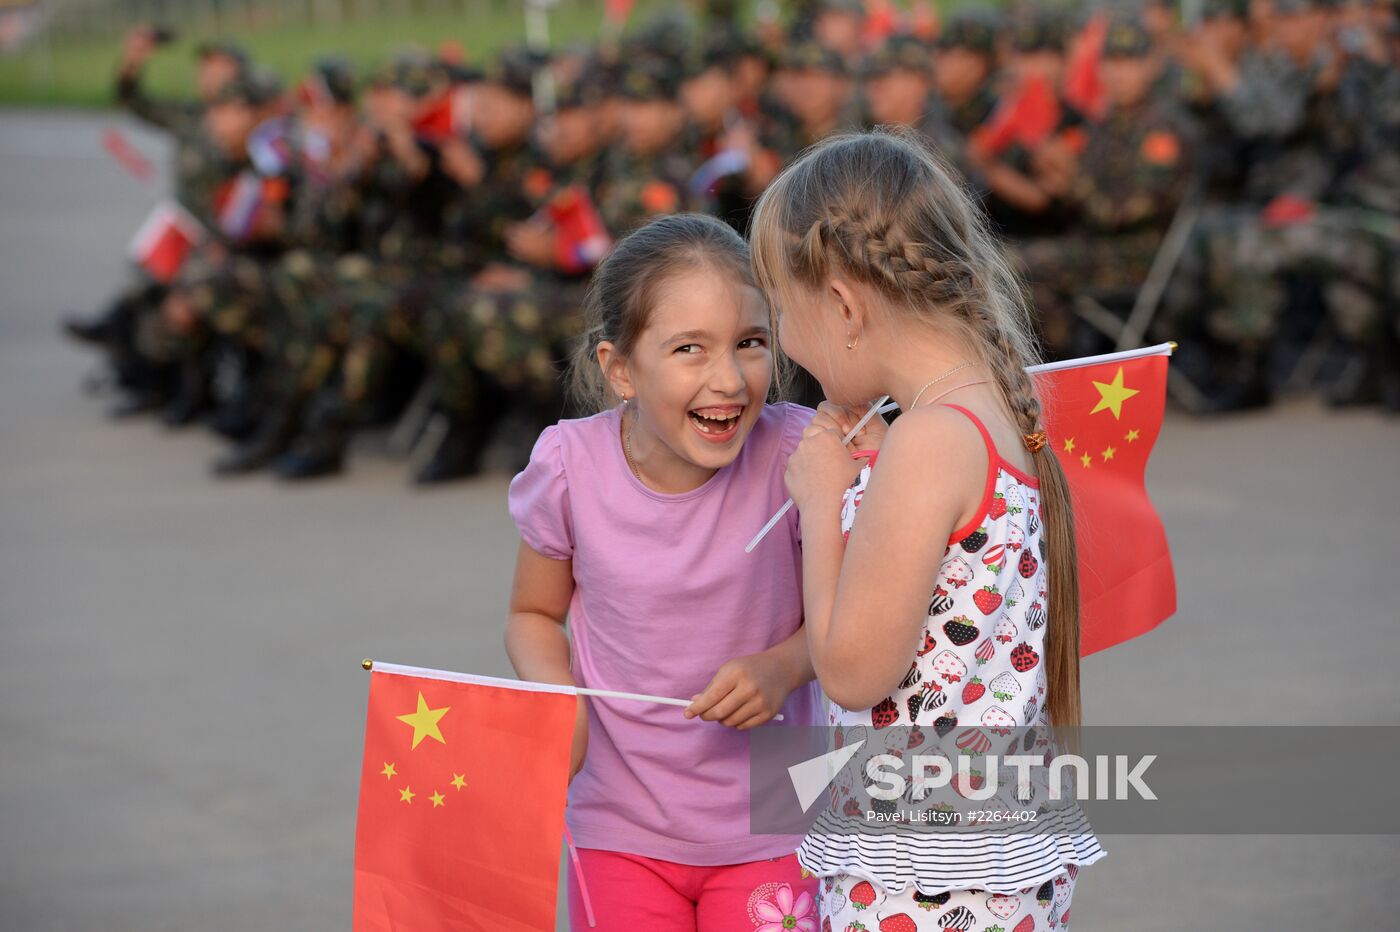 Peace Mission 2013, Russia-China joint anti-terrorism drill